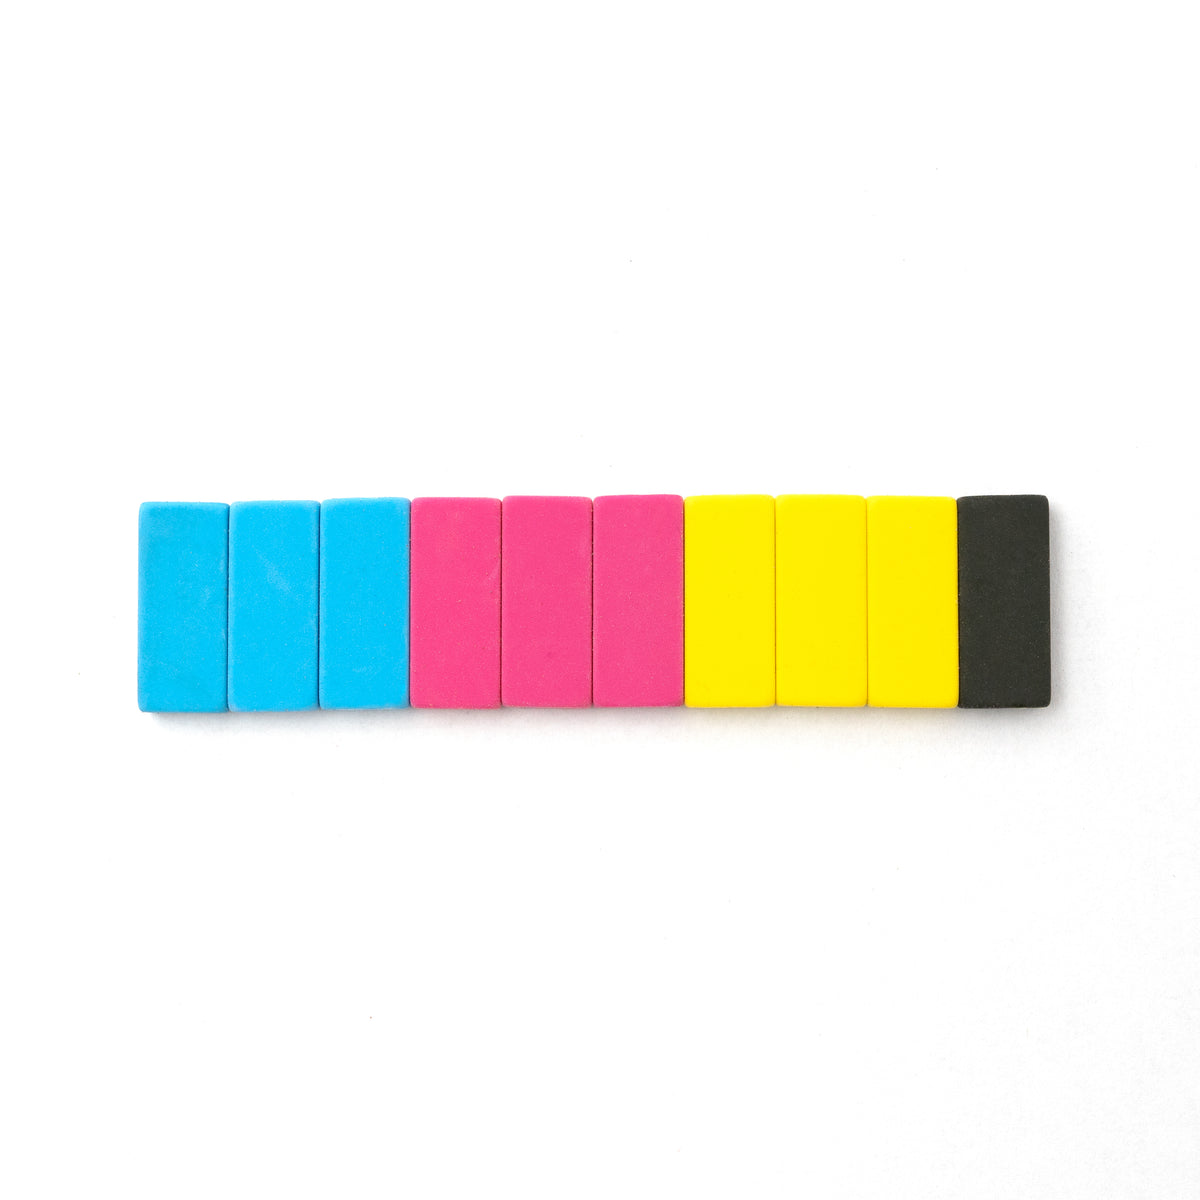 A row of colorful rectangular erasers arranged in a gradient from blue to Blackwing Volume 64 Replacement Erasers on a white background.